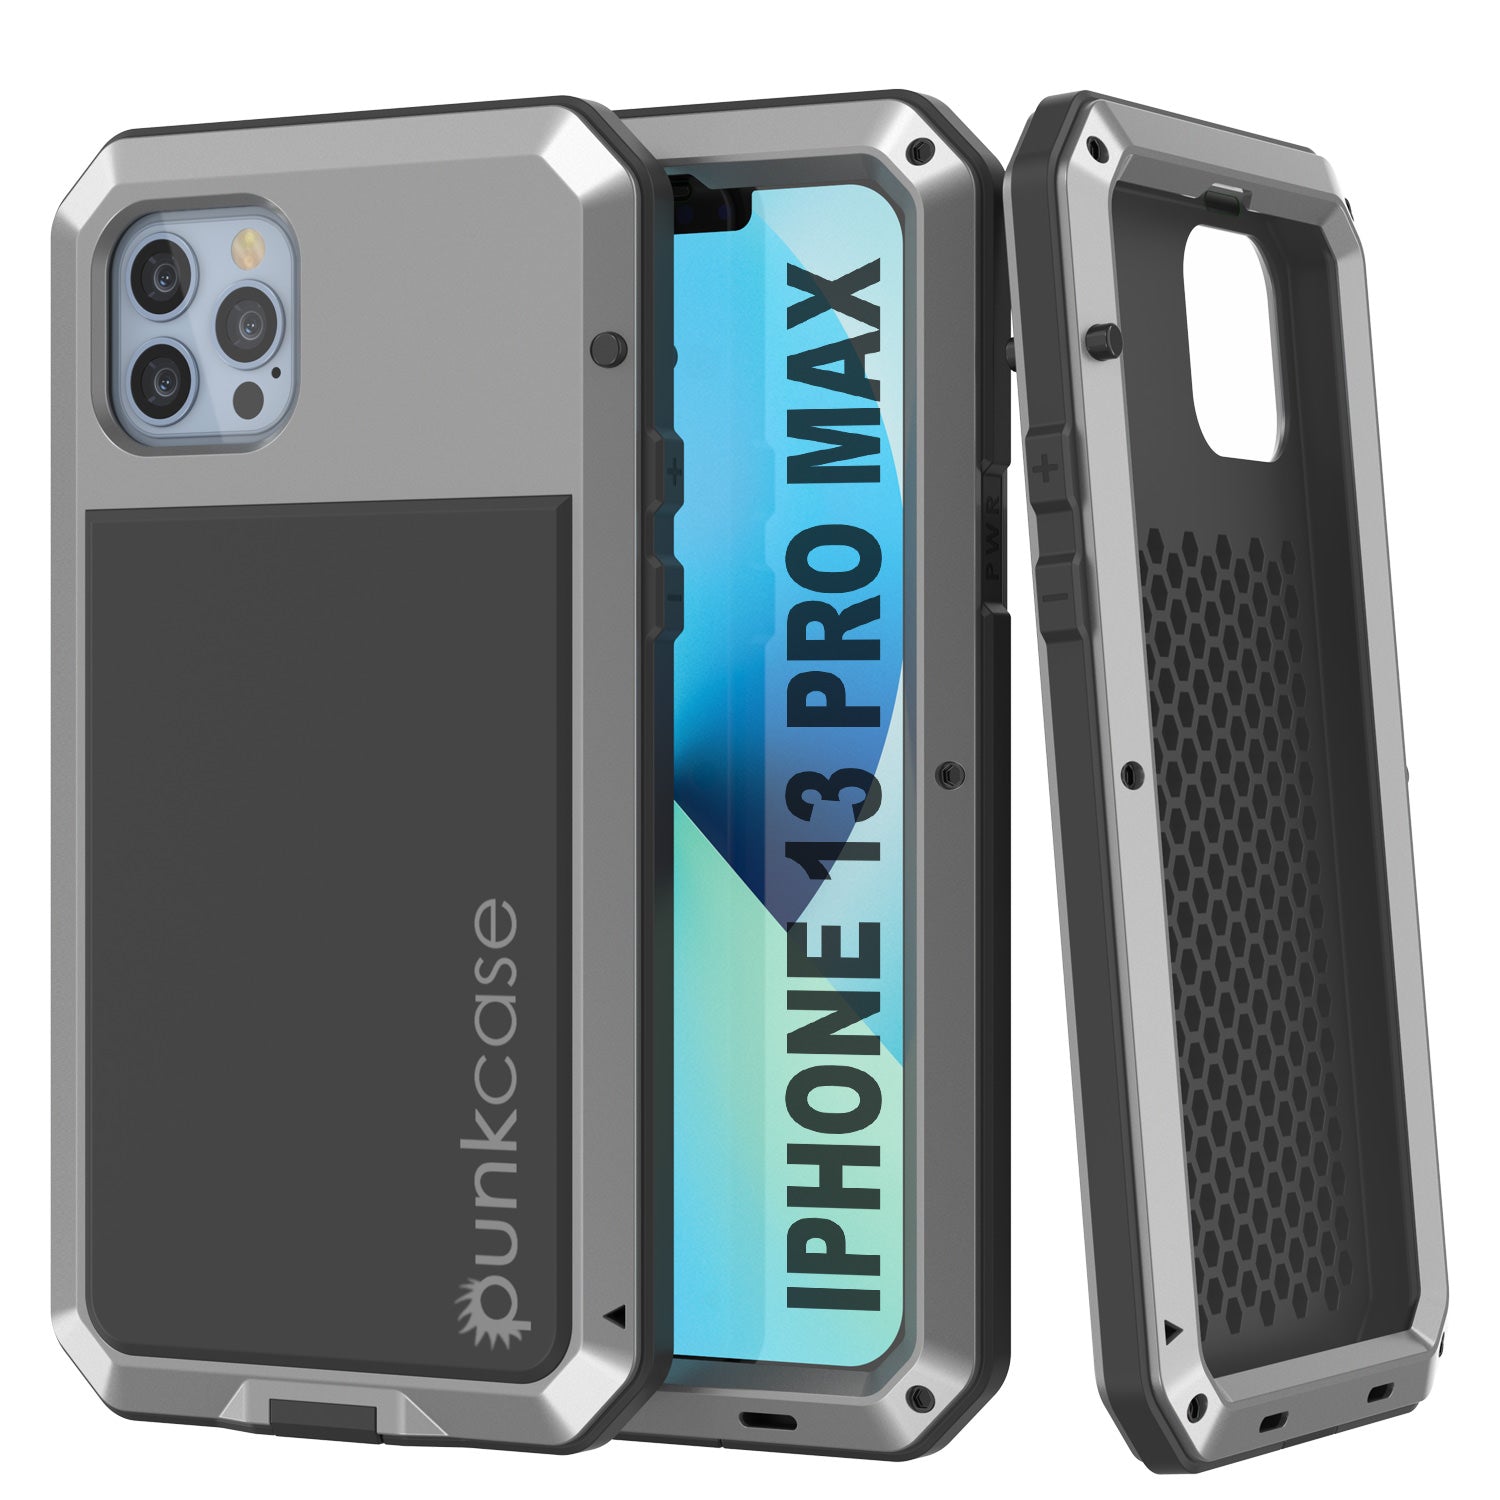 https://www.punkcase.com/cdn/shop/products/iphone_13_pro_max_metal_case_heavy_duty_military_grade_rugged_armor_cover_shock_proof_hybrid_full_body_hard_aluminum_tpu_3_piece_innovative_design_cooling_system_non_slip_w_prime_drop_b559460d-8c76-409f-b580-d55de64f4fad.jpg?v=1634835604